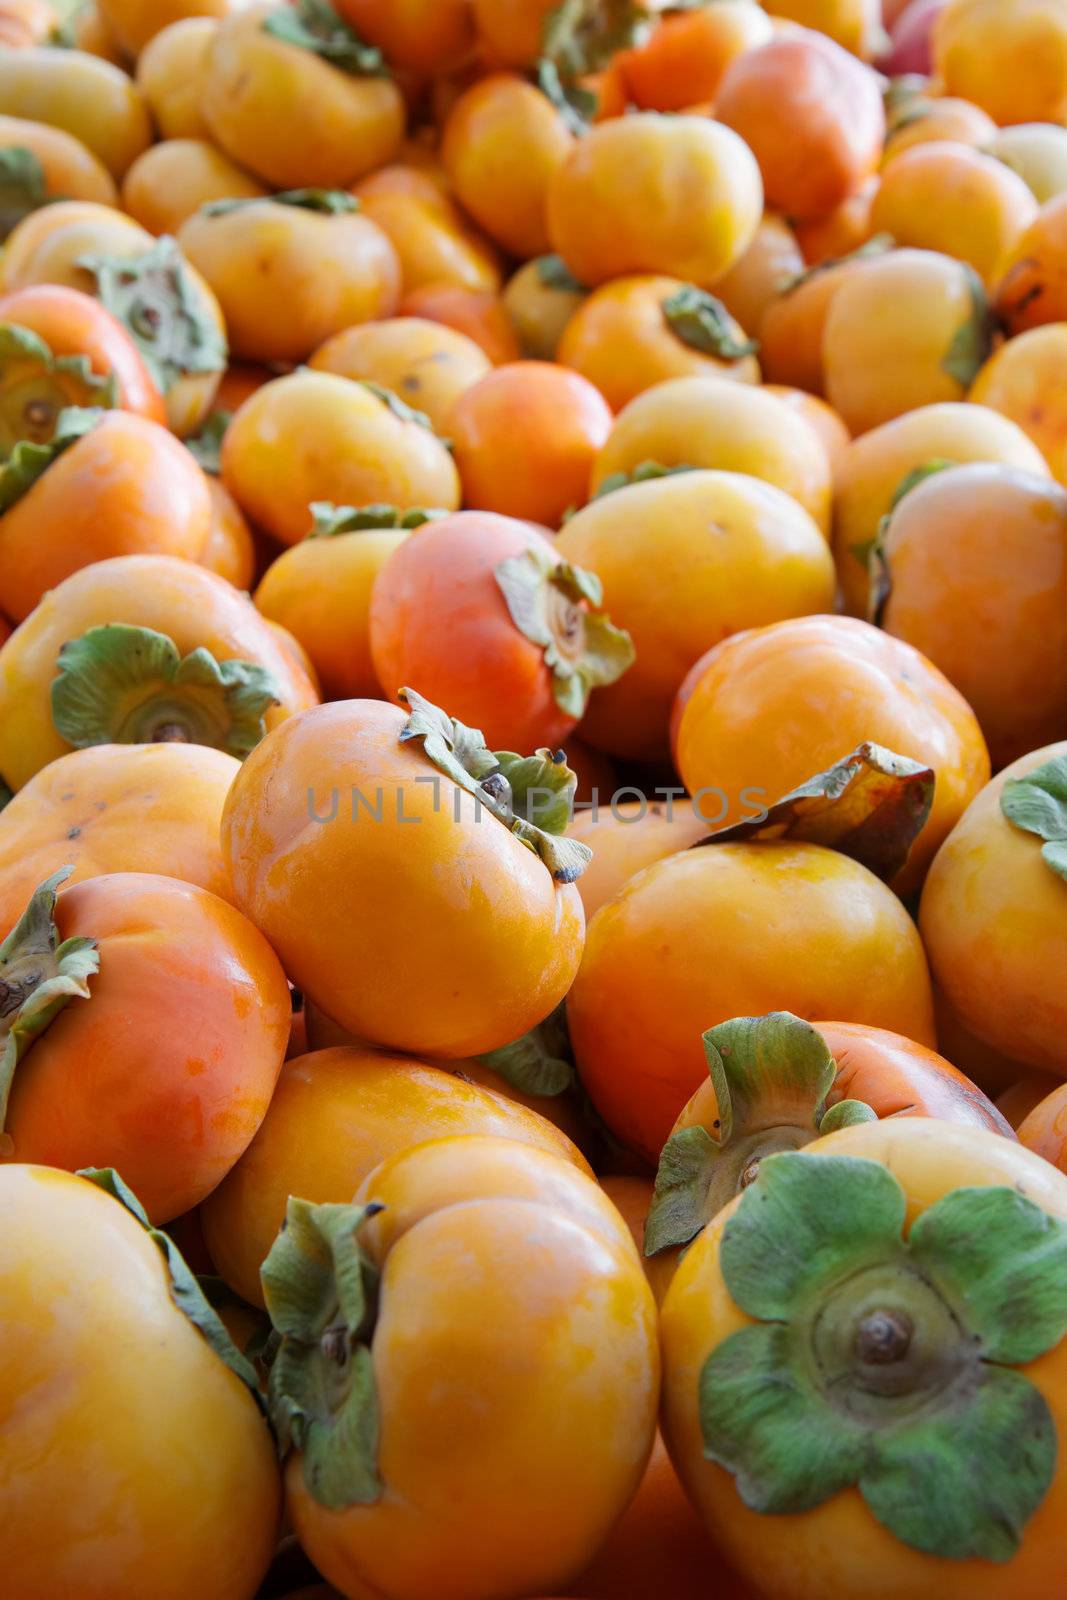 Pile of orange green topped persimmons at the farmers market